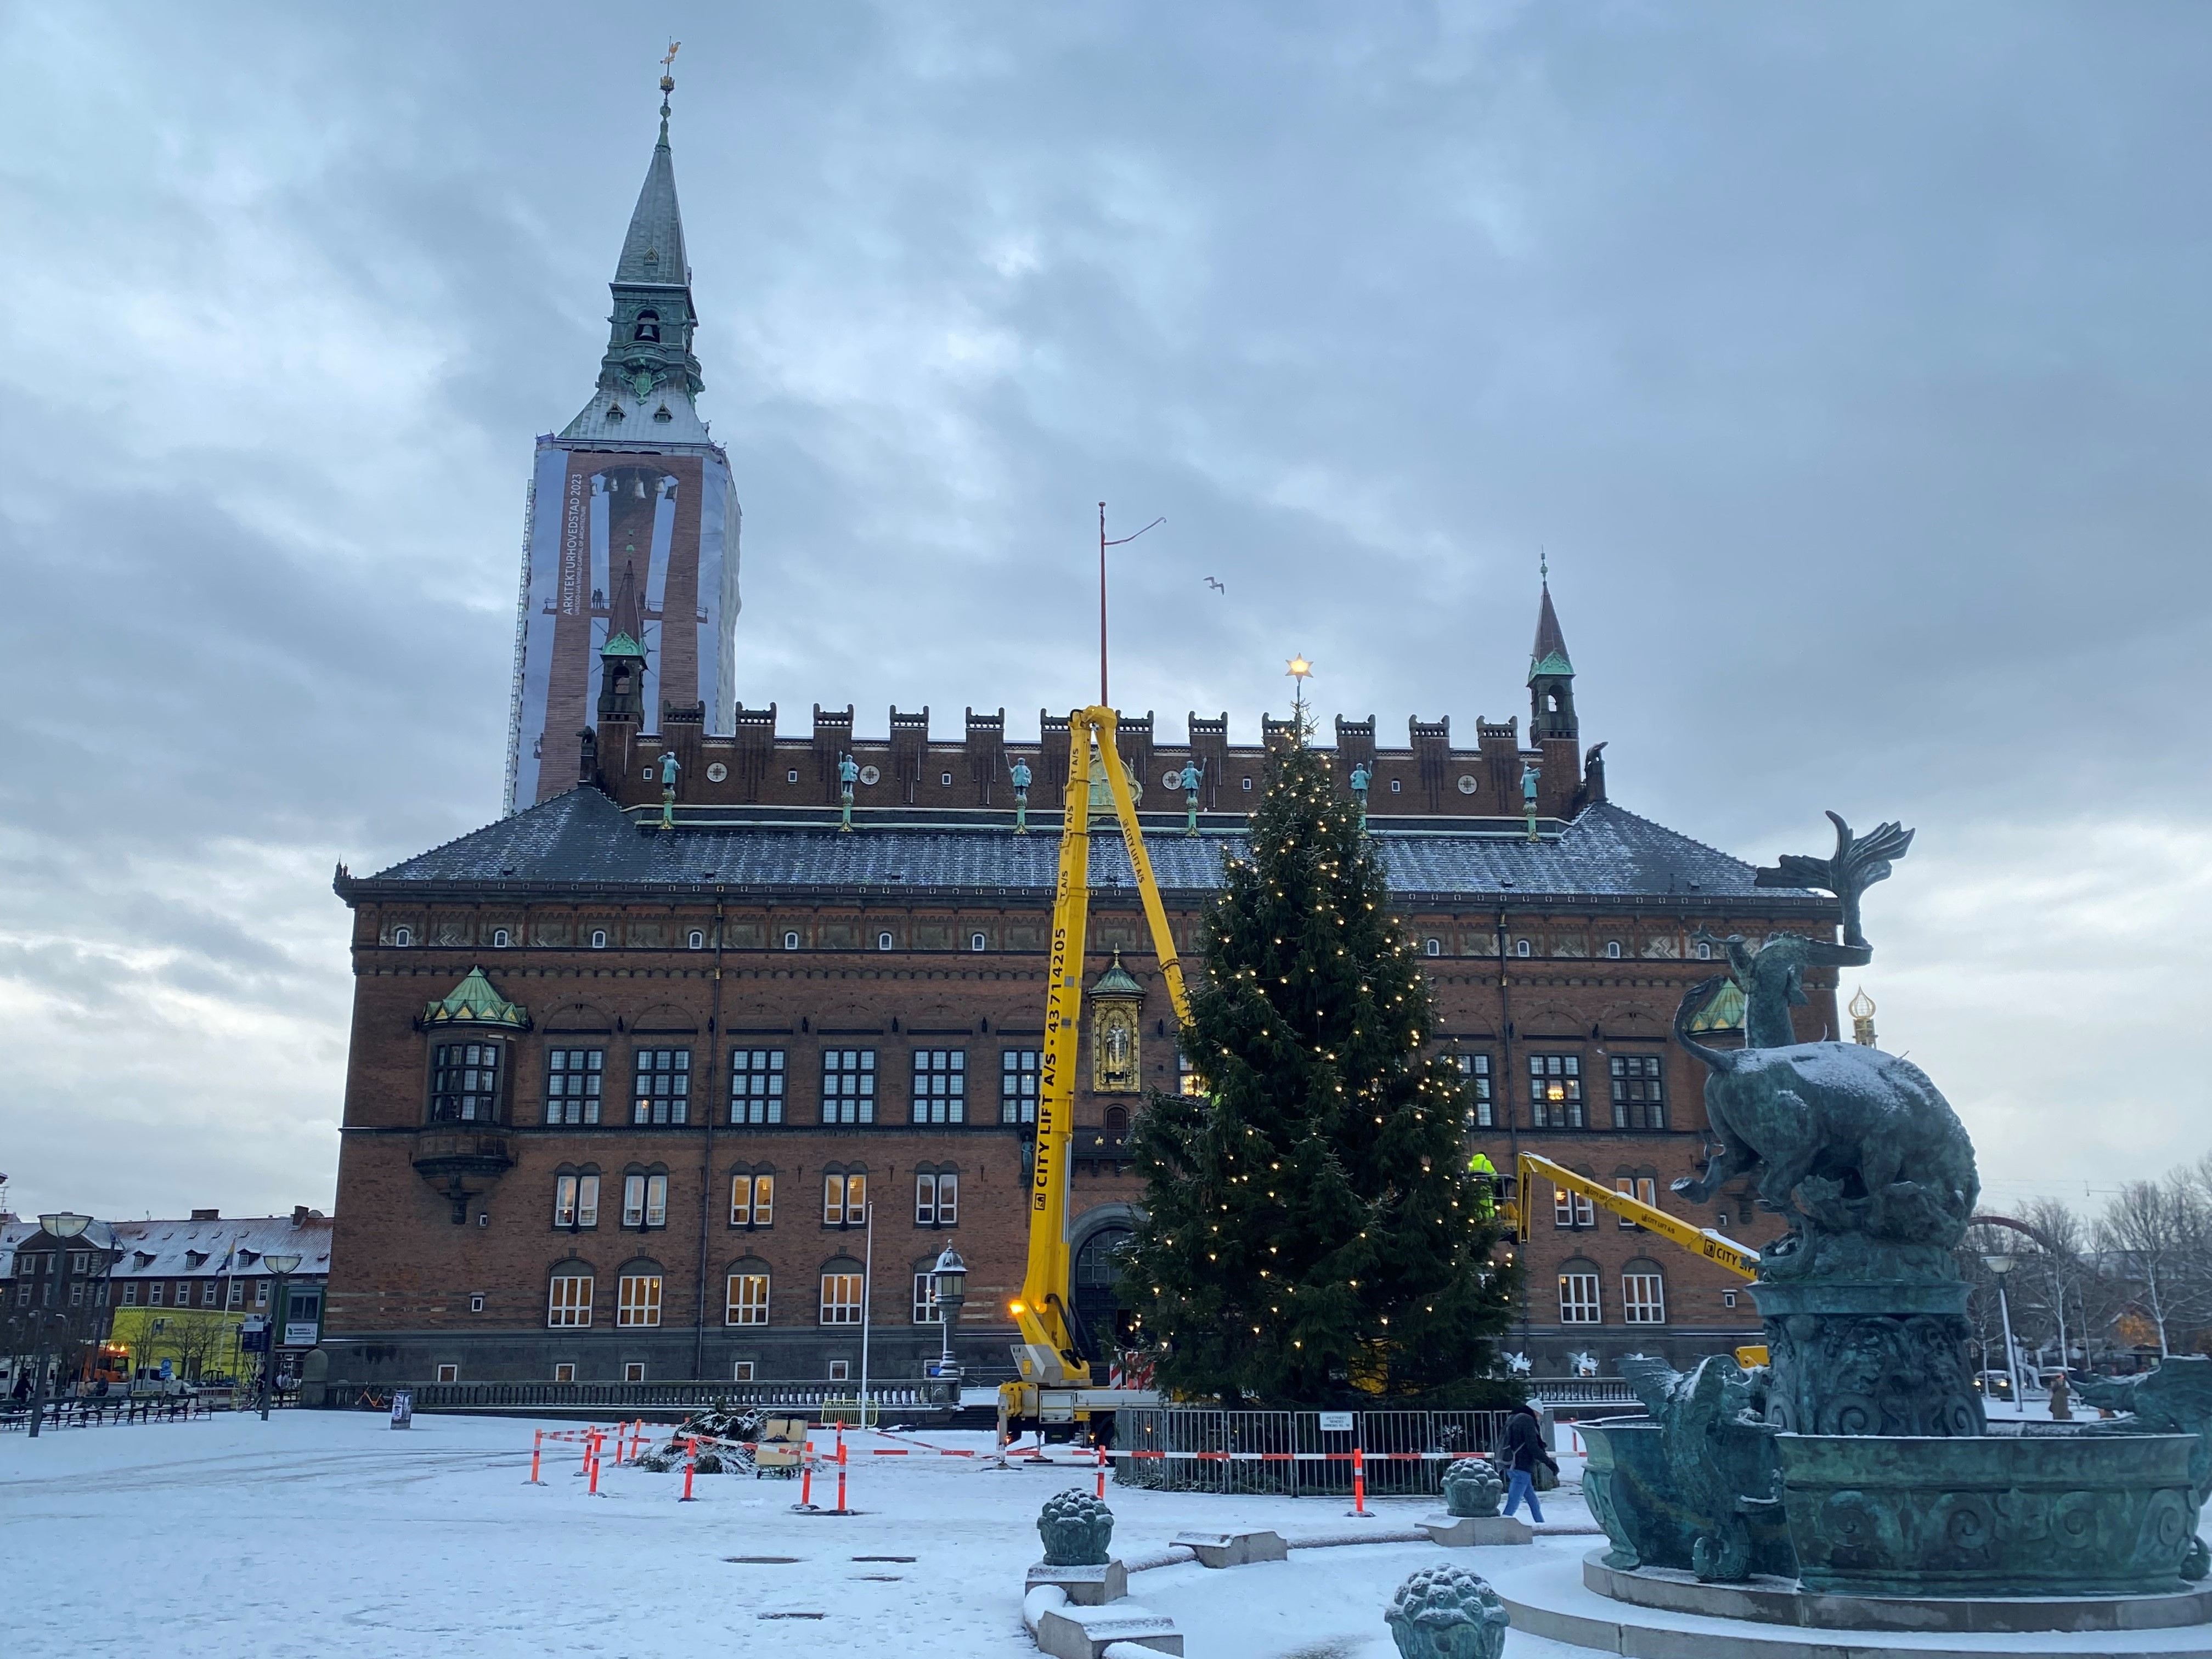 First Sunday in advent: The big Christmas tree is lit at Rådhuspladsen